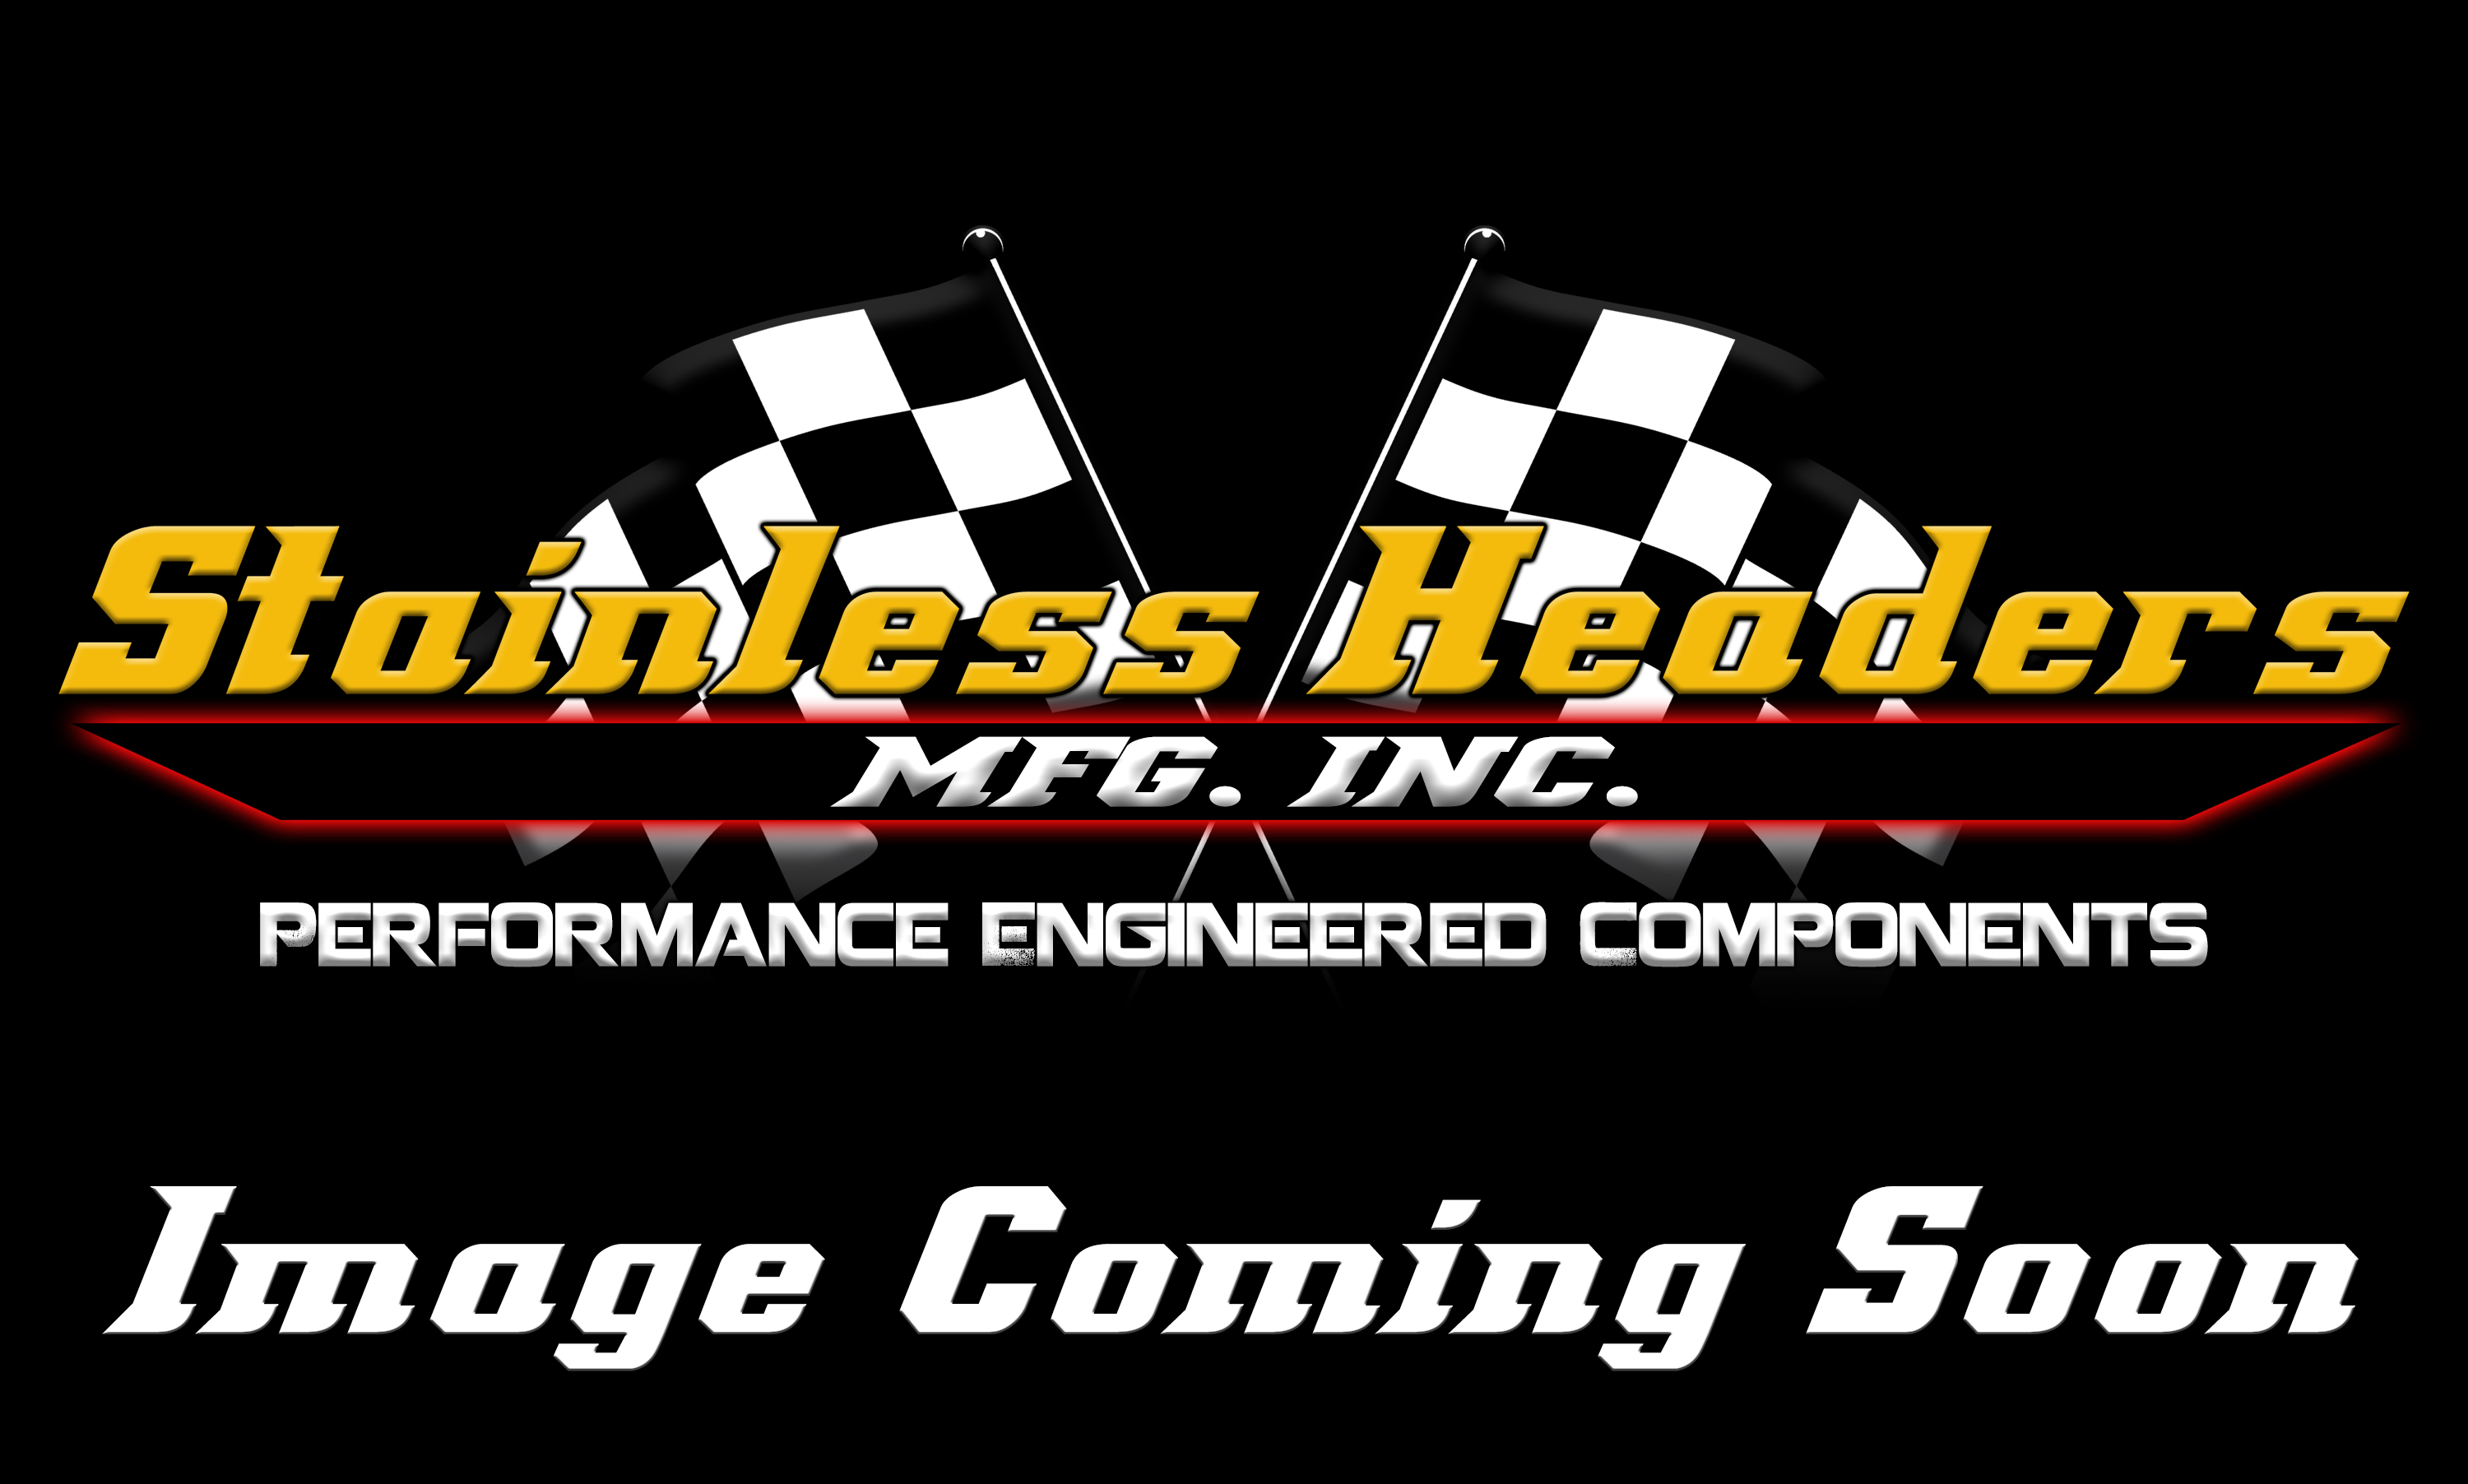 Stainless Headers - 2 1/8" Primary 2 into 1 Performance Merge Collector-16ga 304ss